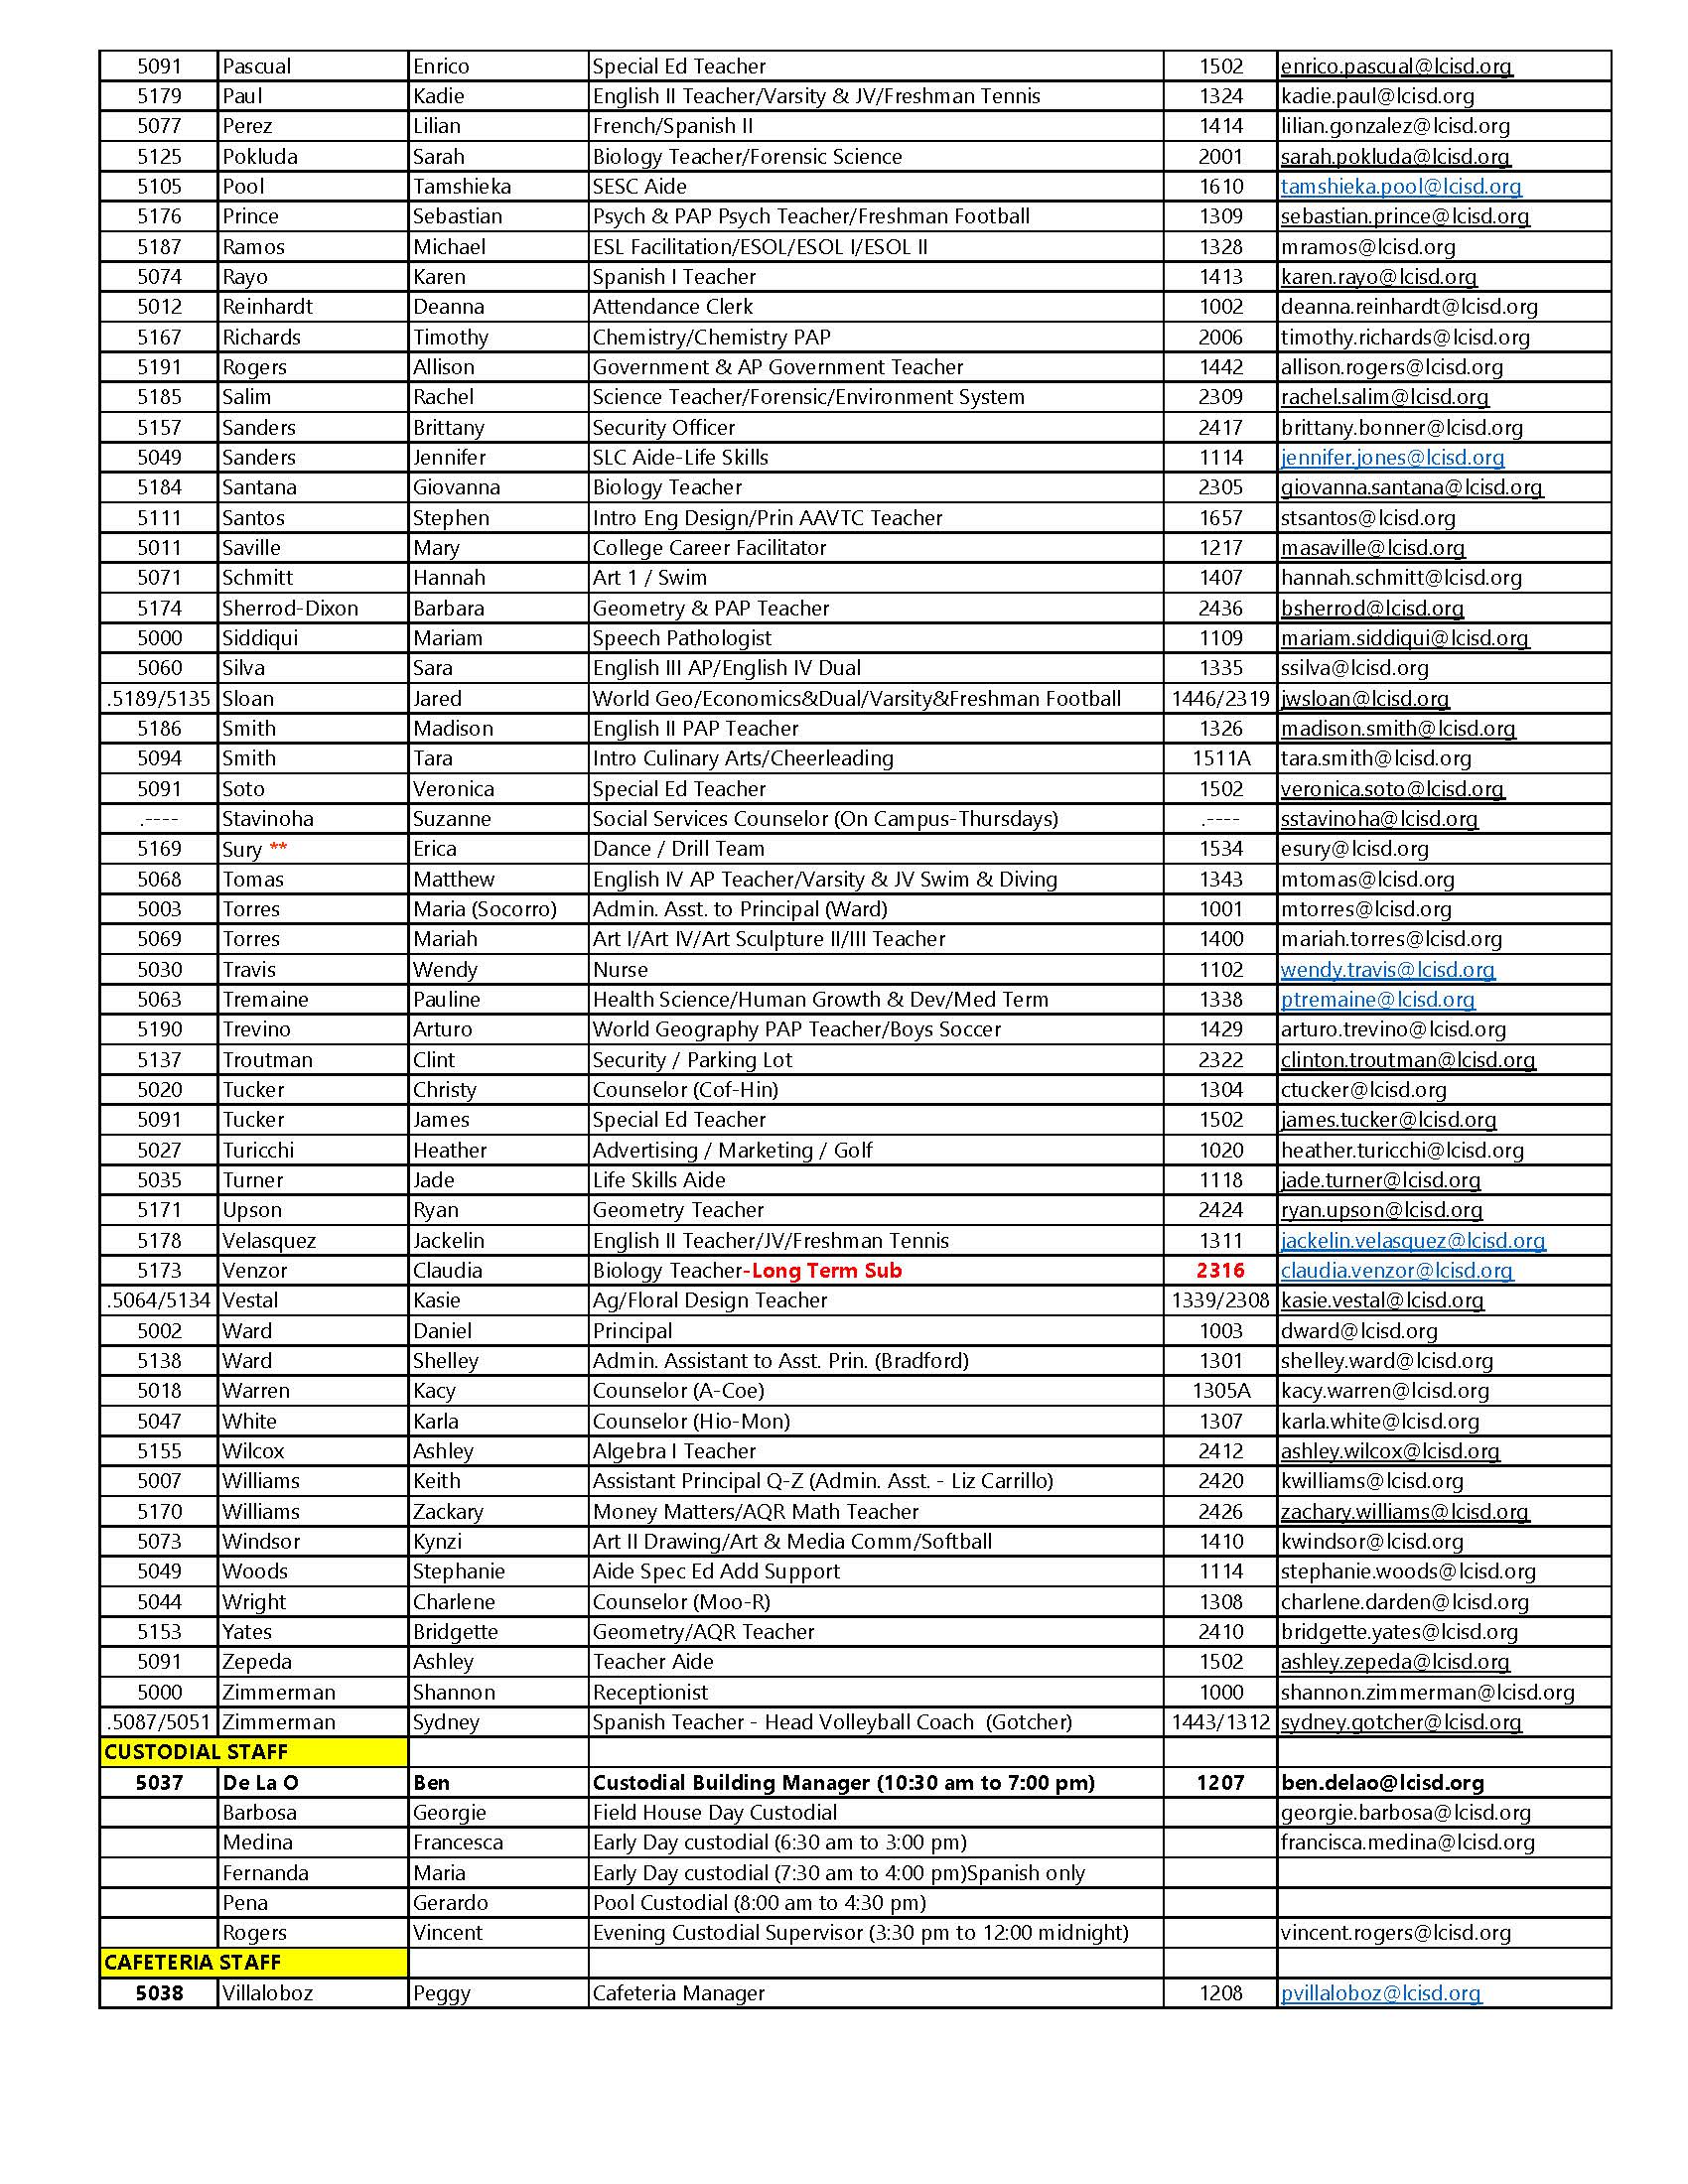 22-23 Staff Directory_Page_3